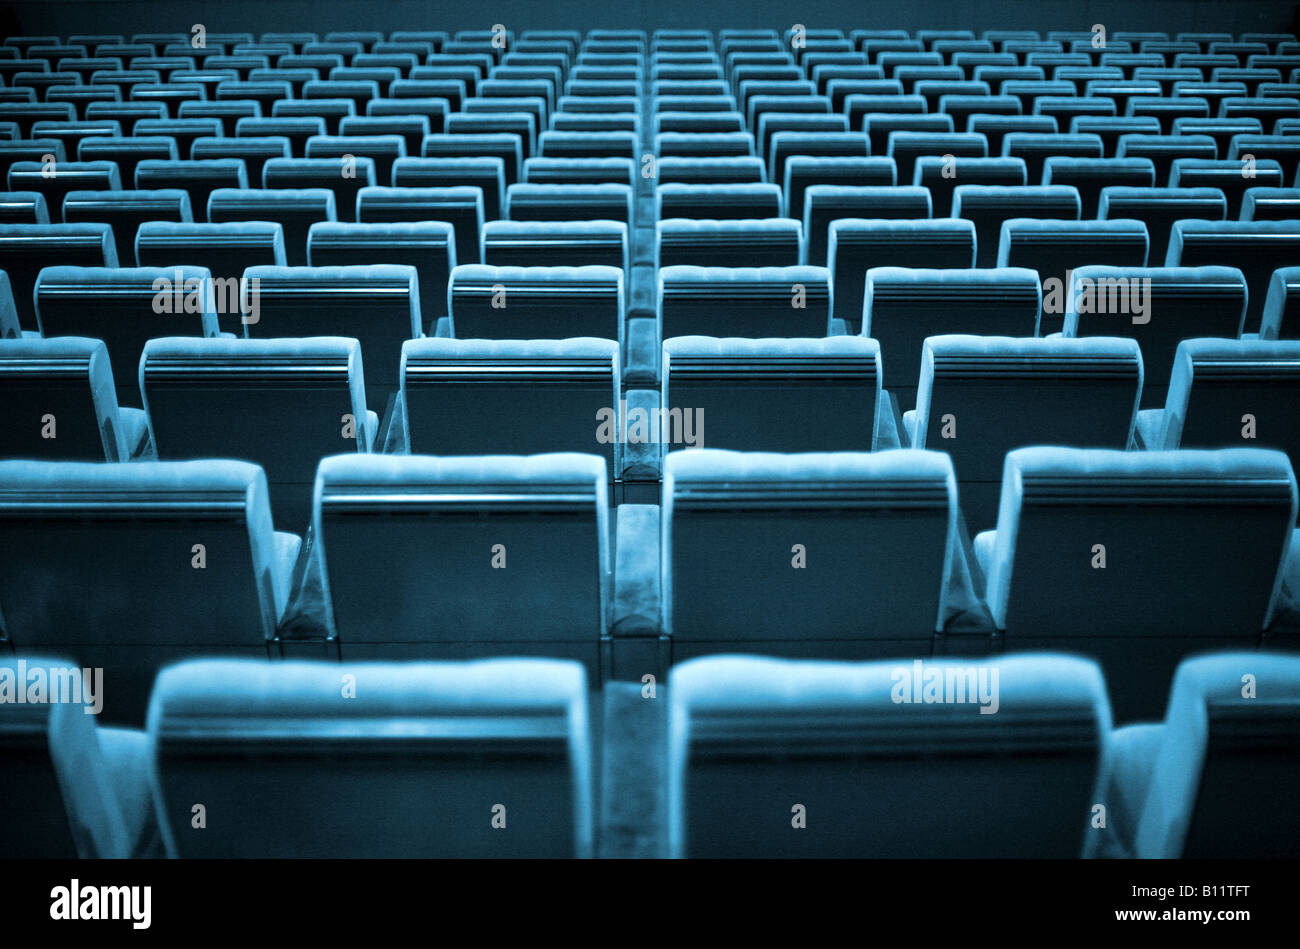 Empty chairs at cinema or theater. Blue tone. Stock Photo